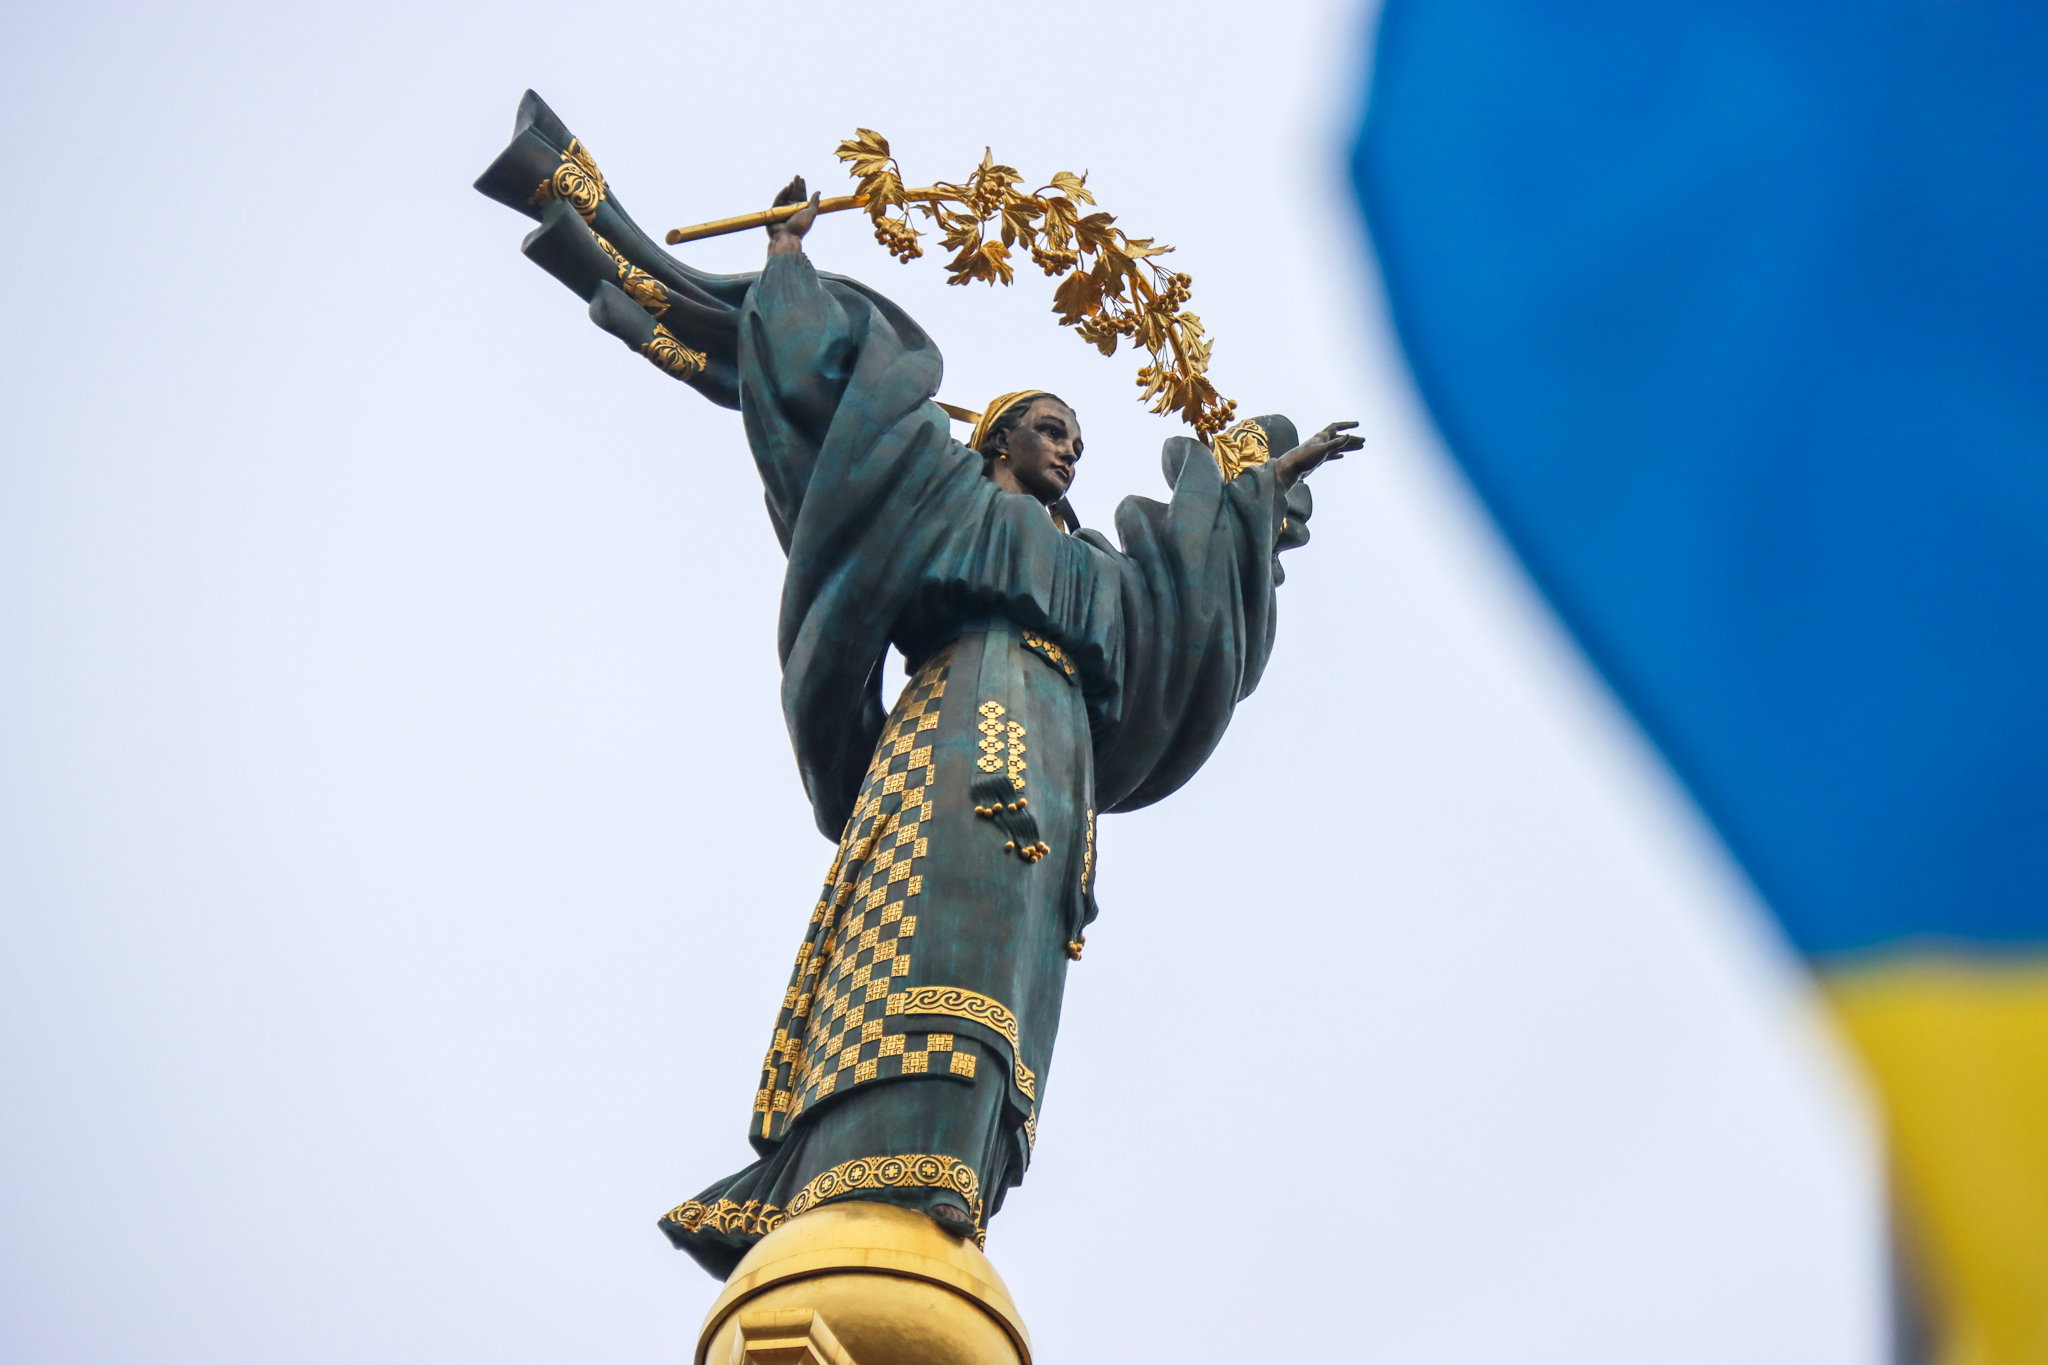 The Ukrainian flag in central Kyiv, with the Independence Square statue.